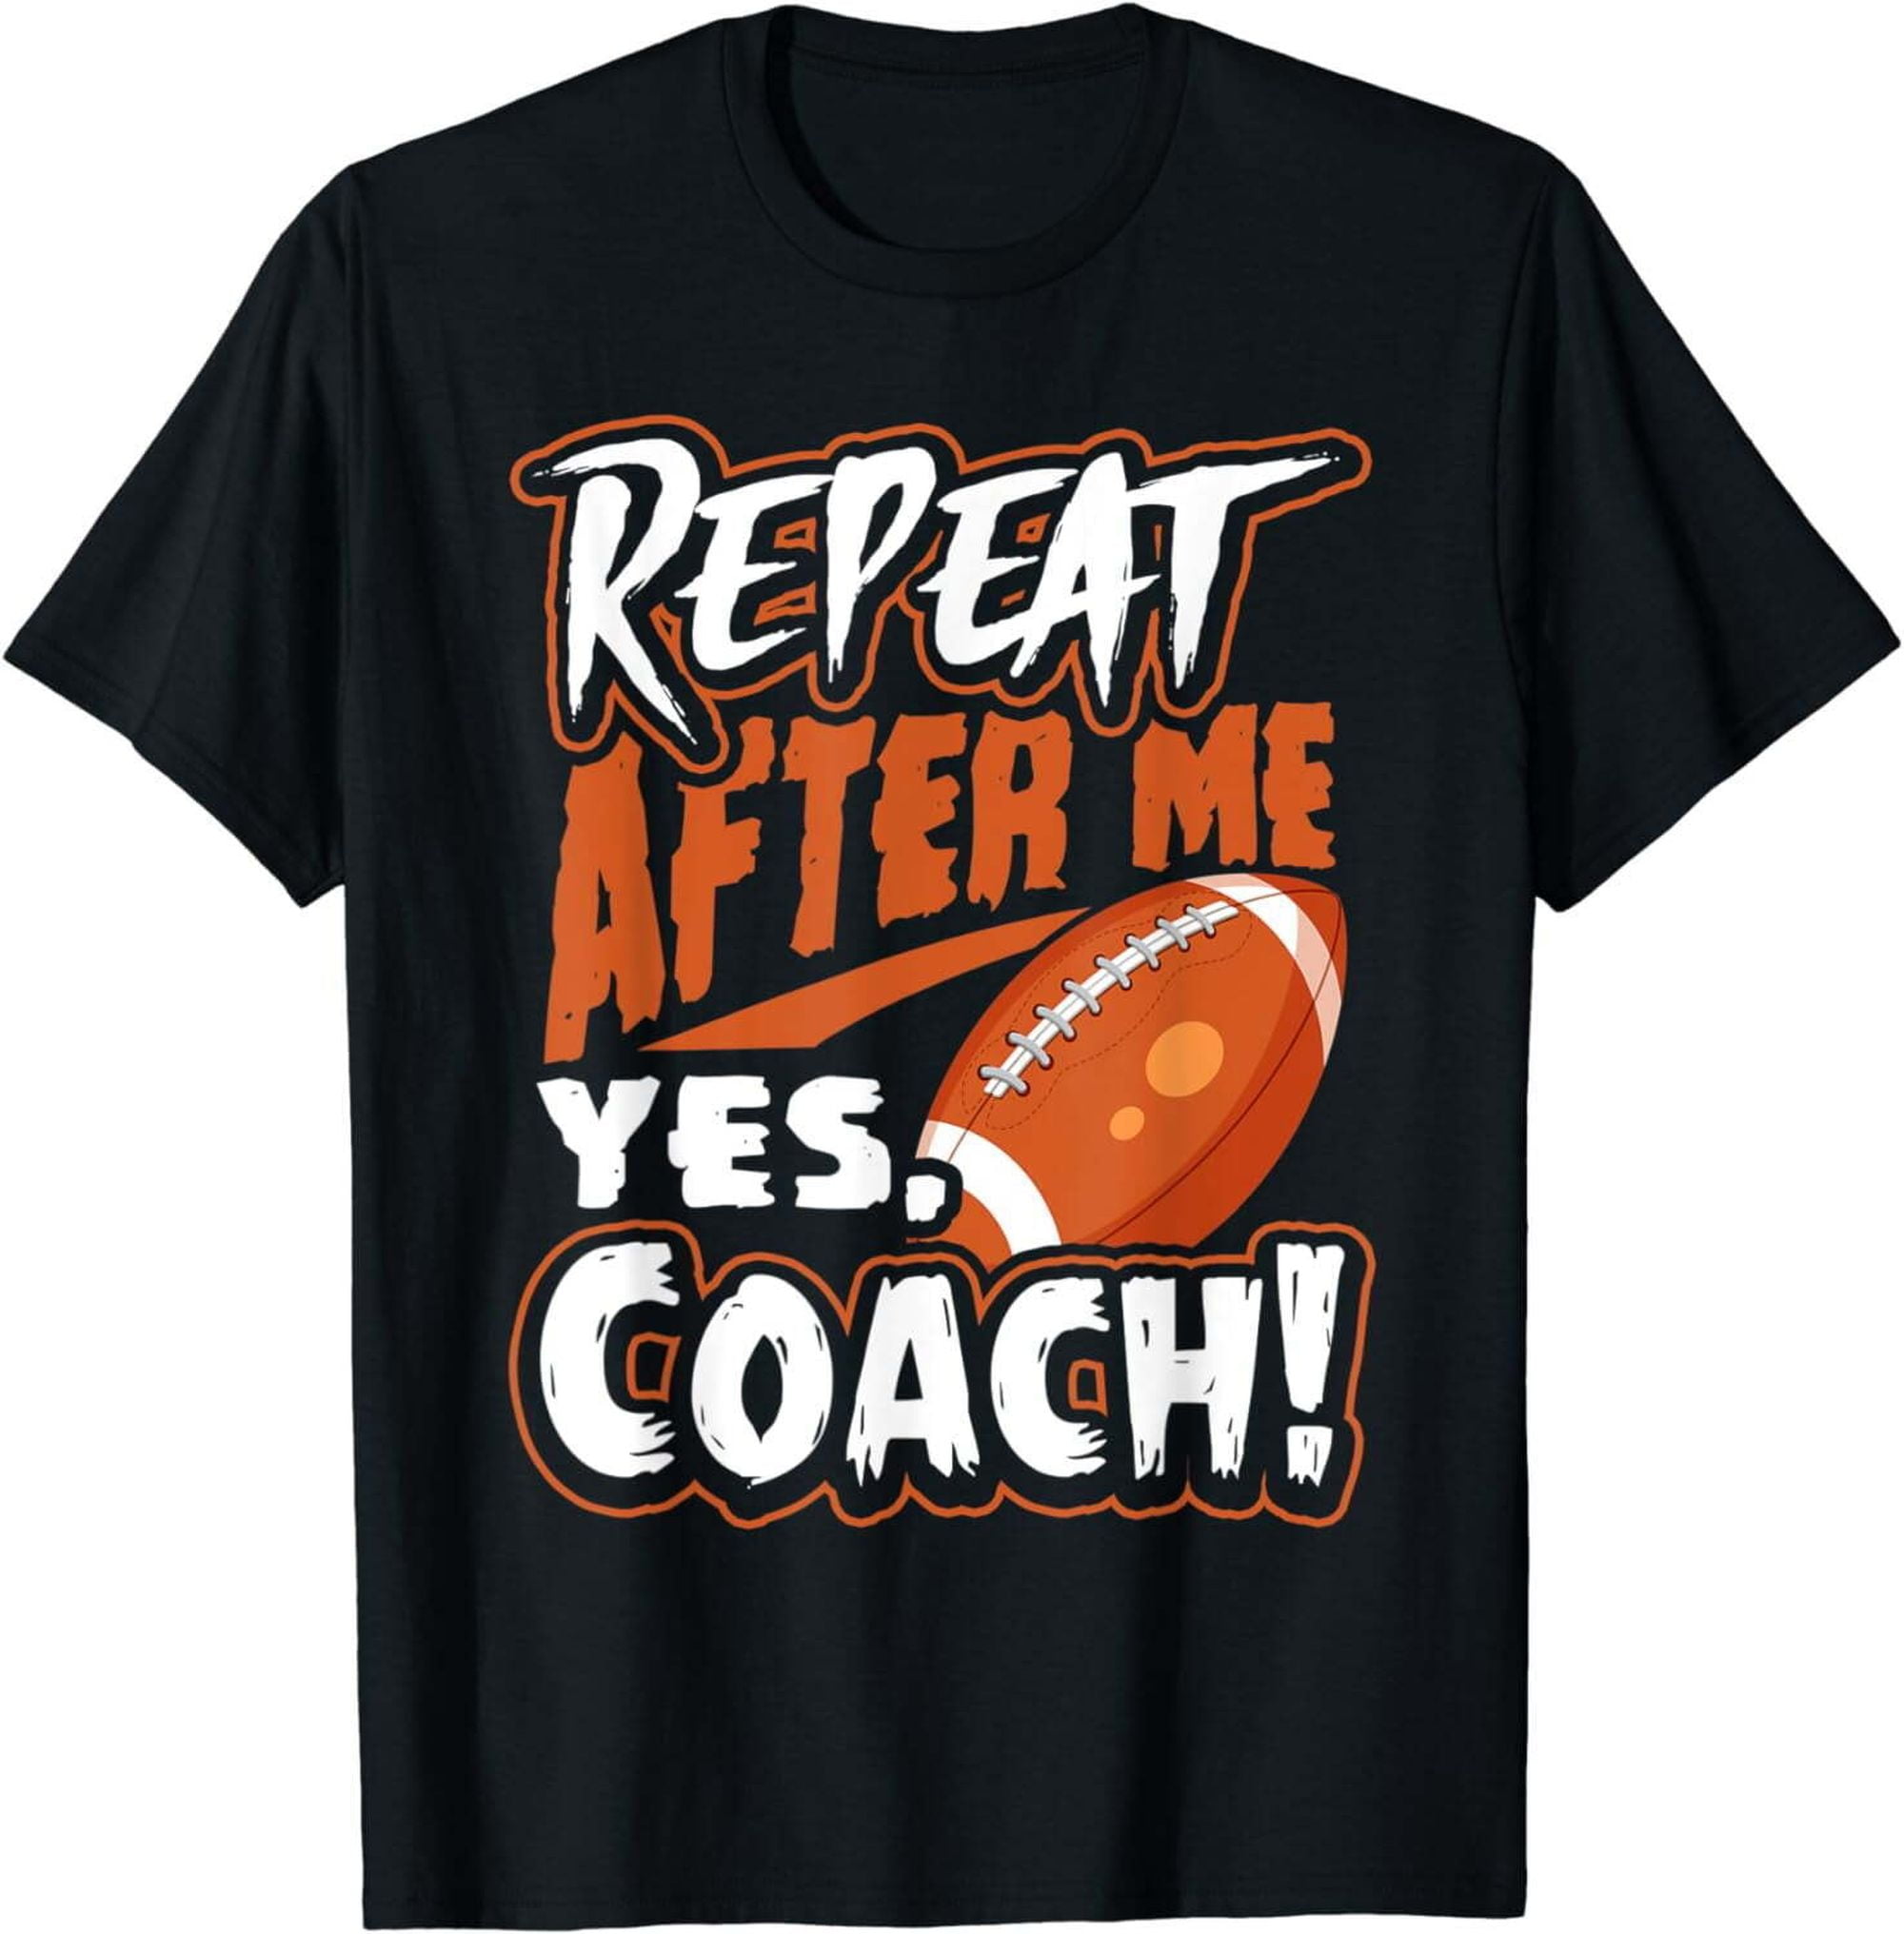 Funny American Football Coach T-Shirt - Repeat After Me and Say Yes ...